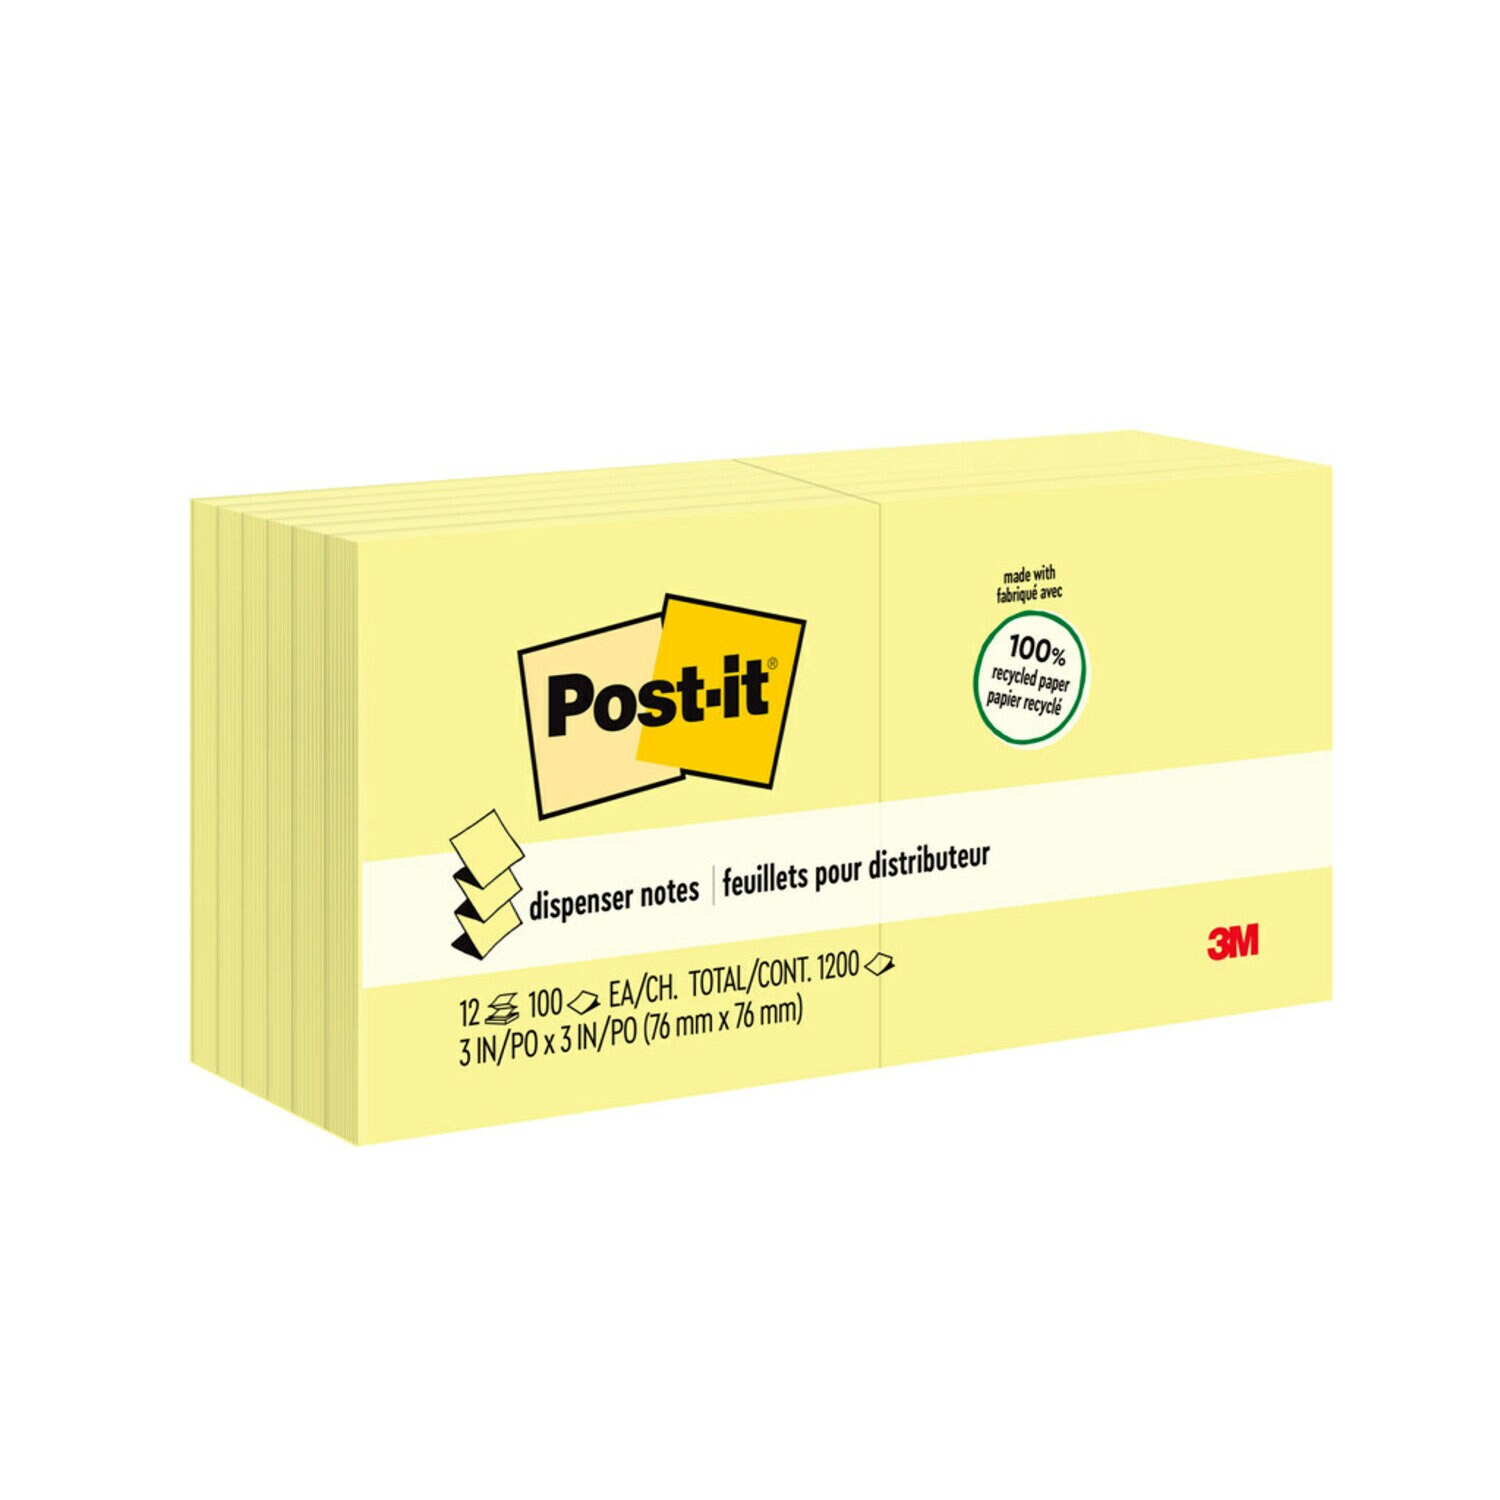 7100230177 - Post-it Dispenser Pop-up Notes R330RP-12YW, 3 in x 3 in (76 mm x 76 mm), Canary Yellow